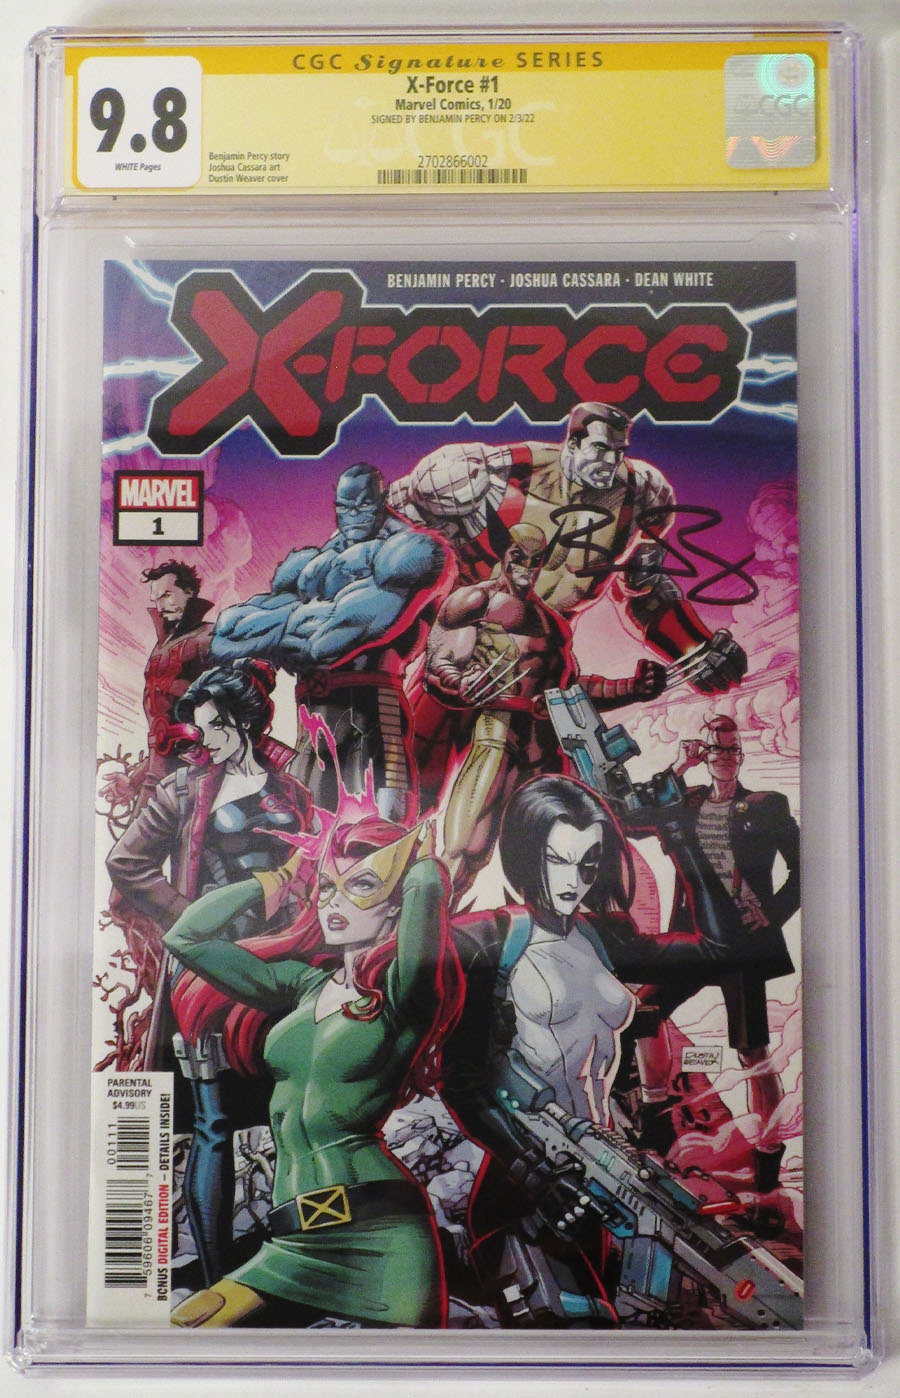 X-Force Vol 6 #1 Cover J 1st Ptg Regular Dustin Weaver Cover (Dawn Of X Tie-In) Signed by Benjamin Percy CGC 9.8